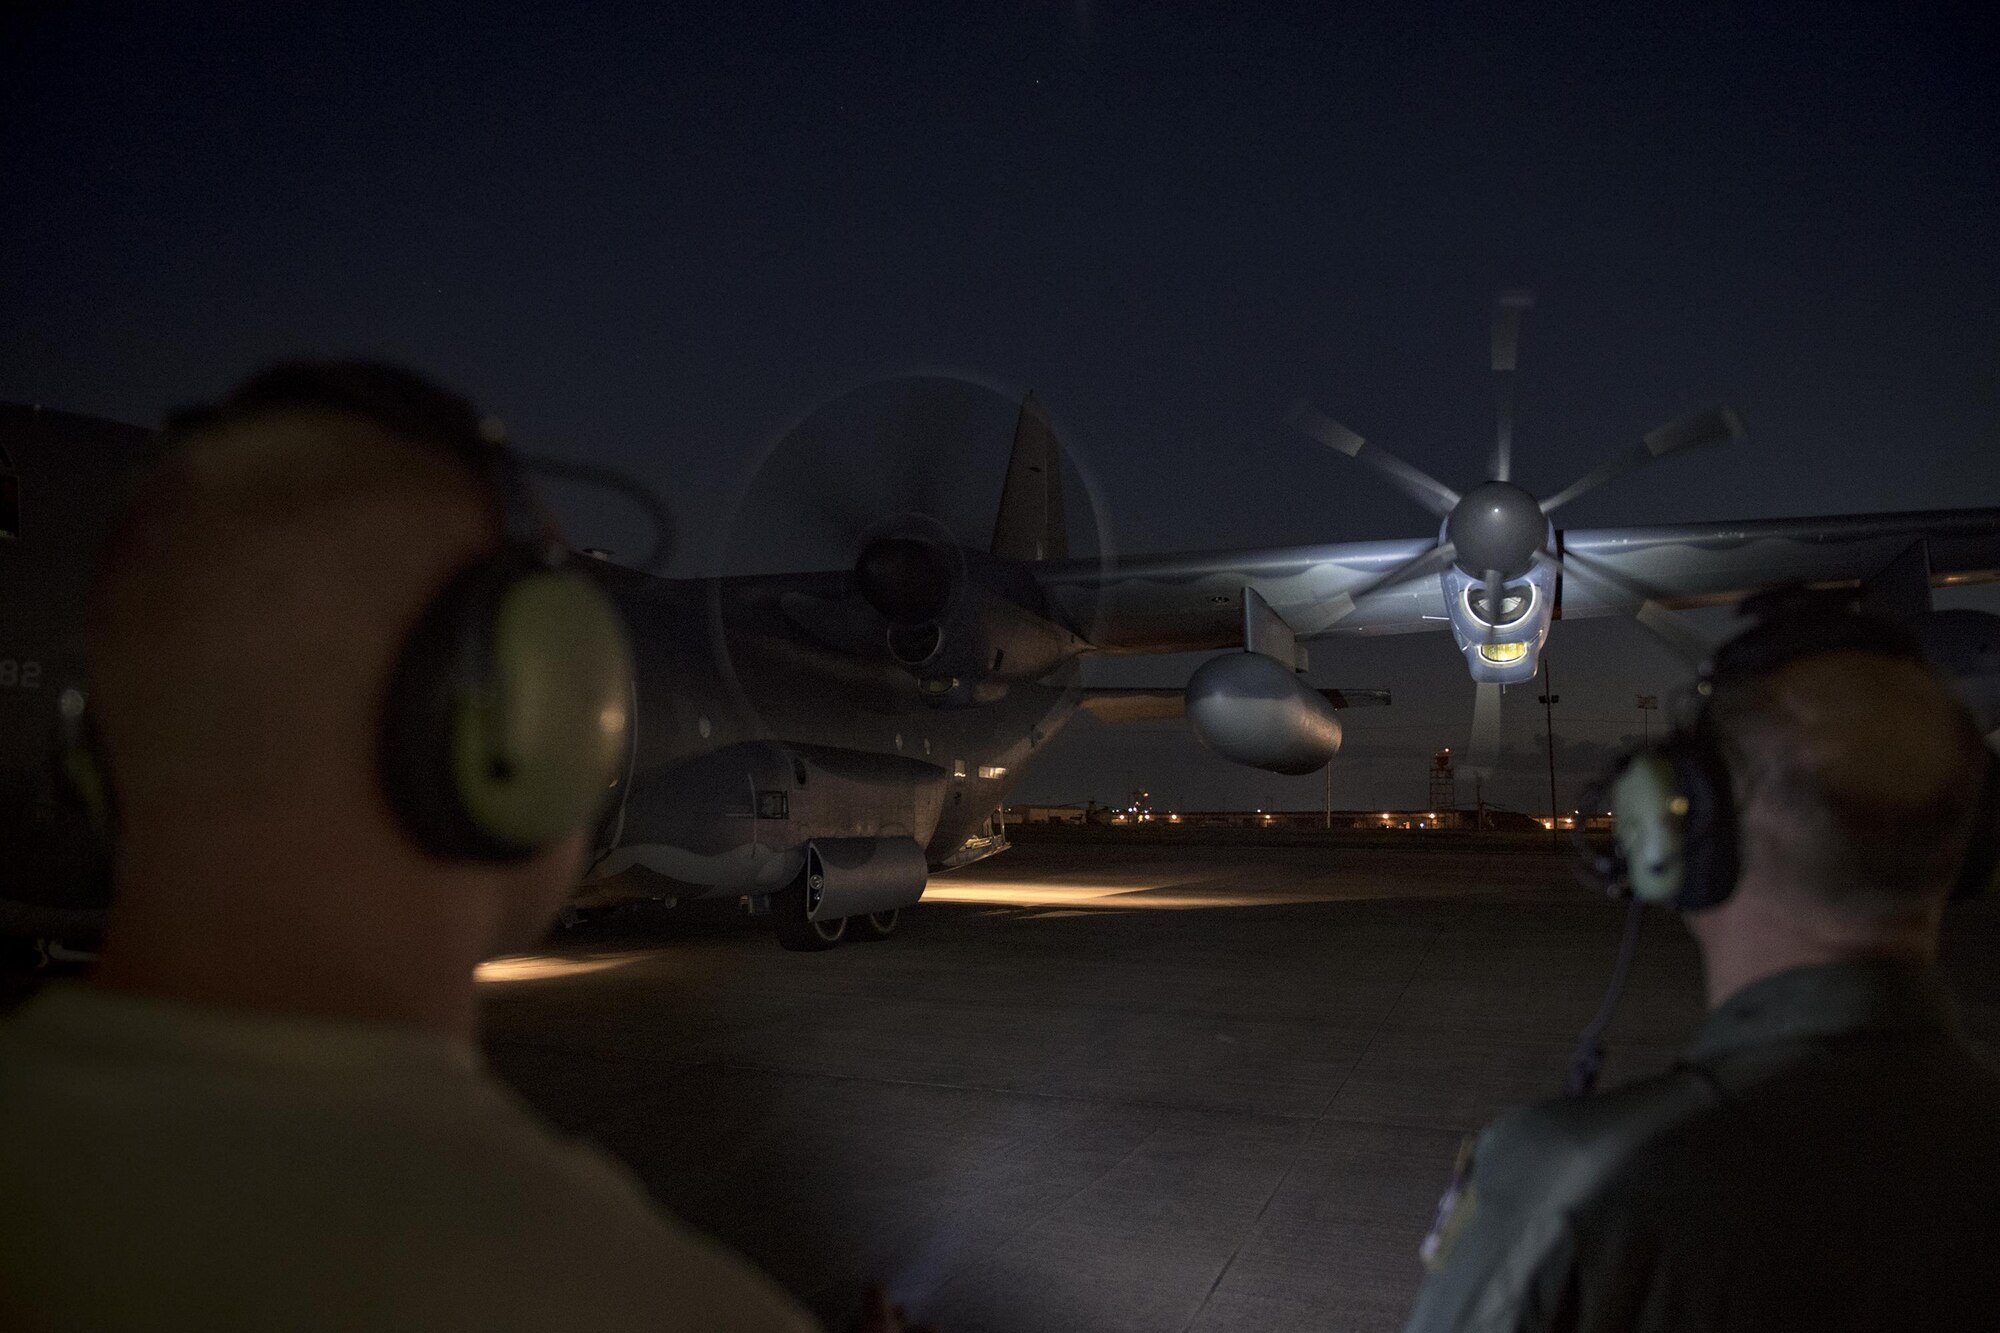 Maintainers and aircrew inspect an HC-130J Combat King II prior to a sortie in support of Hurricane Harvey relief efforts, Aug. 28, 2017, at Naval Air Station Fort Worth Joint Reserve Base, Texas. The 347th Rescue Group from Moody Air Force Base, Ga. sent aircraft and personnel in support of Air Forces Northern as part of Northern Command's support of FEMA's disaster response efforts. (U.S. Air Force photo by Staff Sgt. Ryan Callaghan)